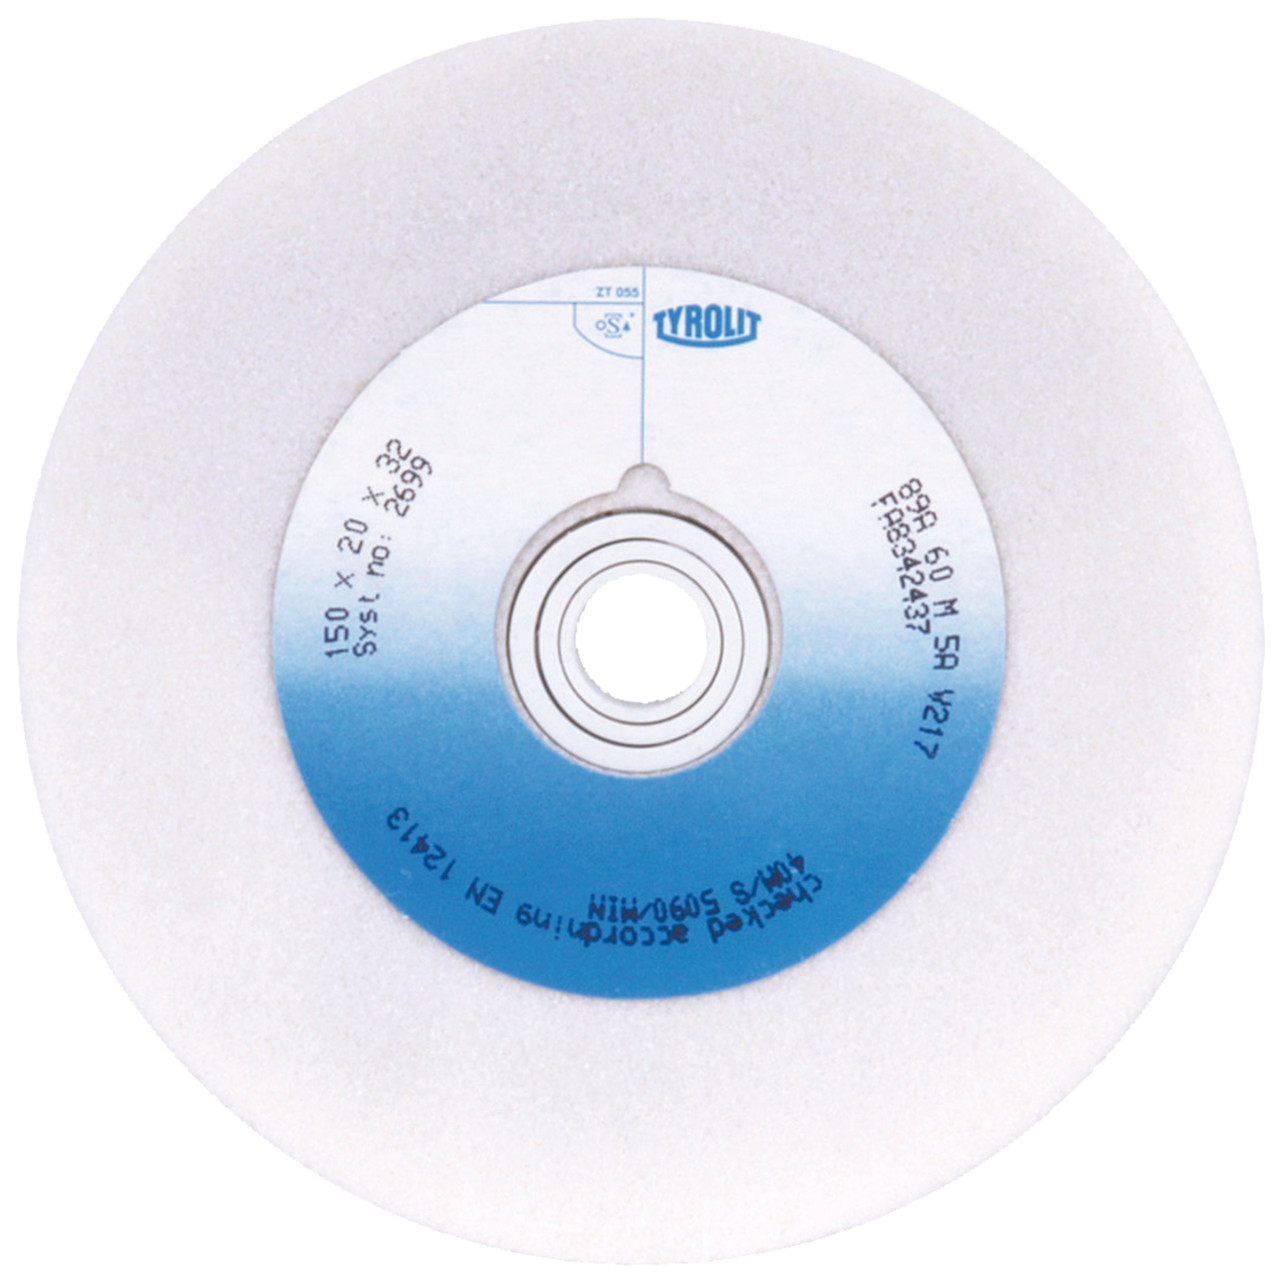 TYROLIT conventional ceramic grinding wheels DxDxH 200x25x32 For high-alloy steels and HSS, shape: 1, Art. 3222